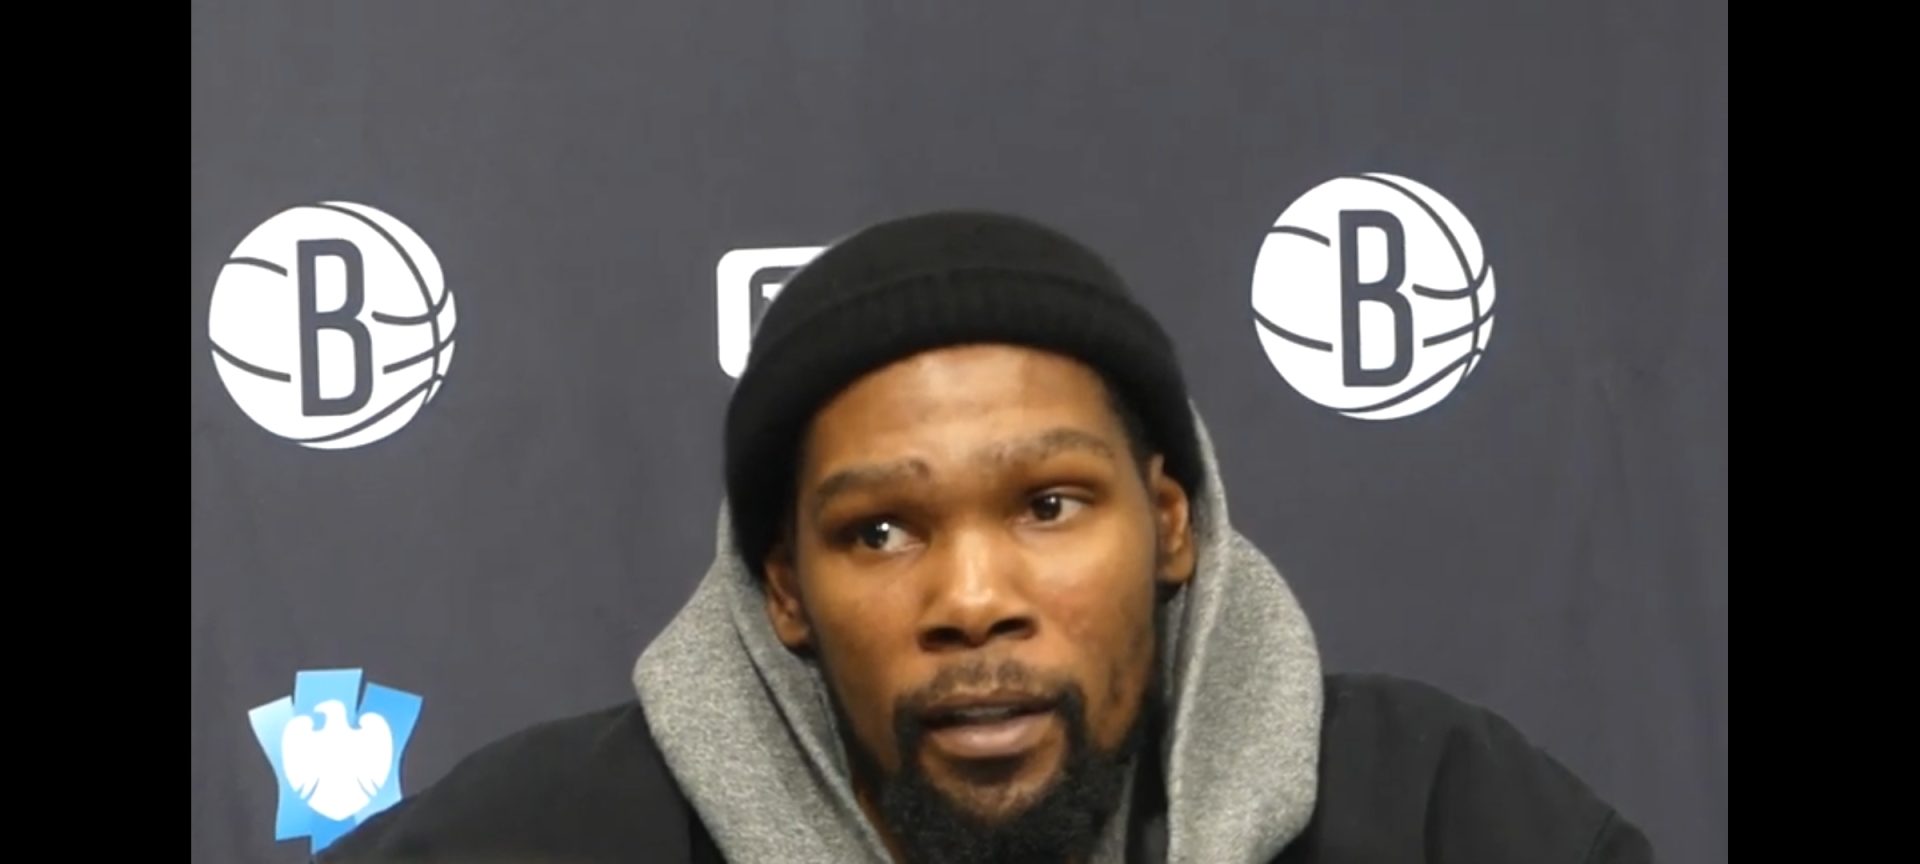 Kevin Durant speaks to the media at Barclays Center in Brooklyn, New York (Photo by Derrel Jazz Johnson for rolling out)